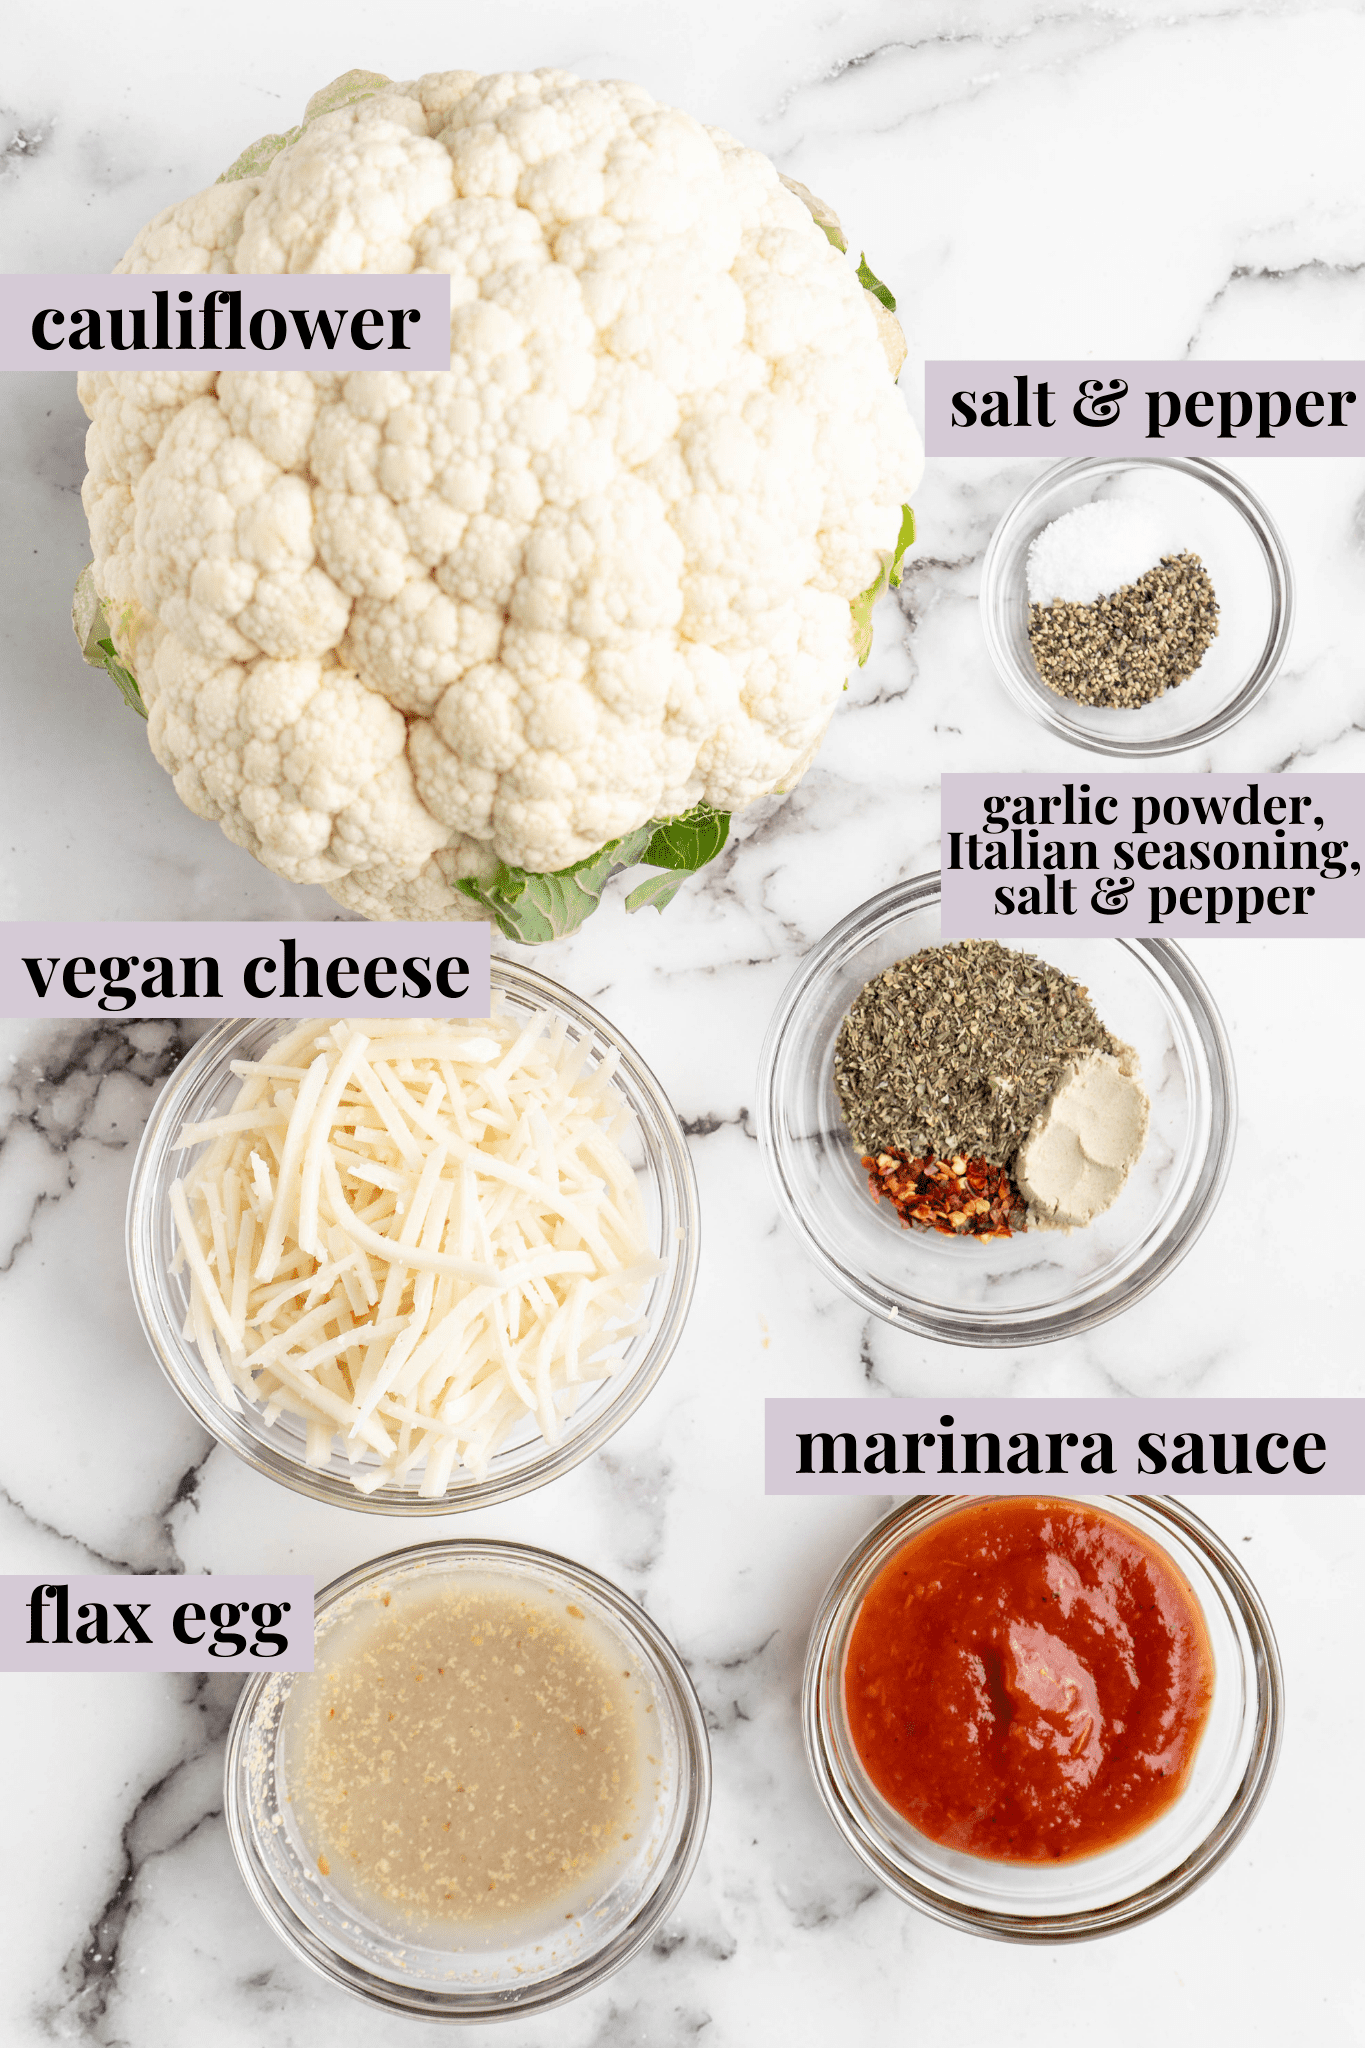 Overhead view of ingredients for cauliflower pizza bites, with labels